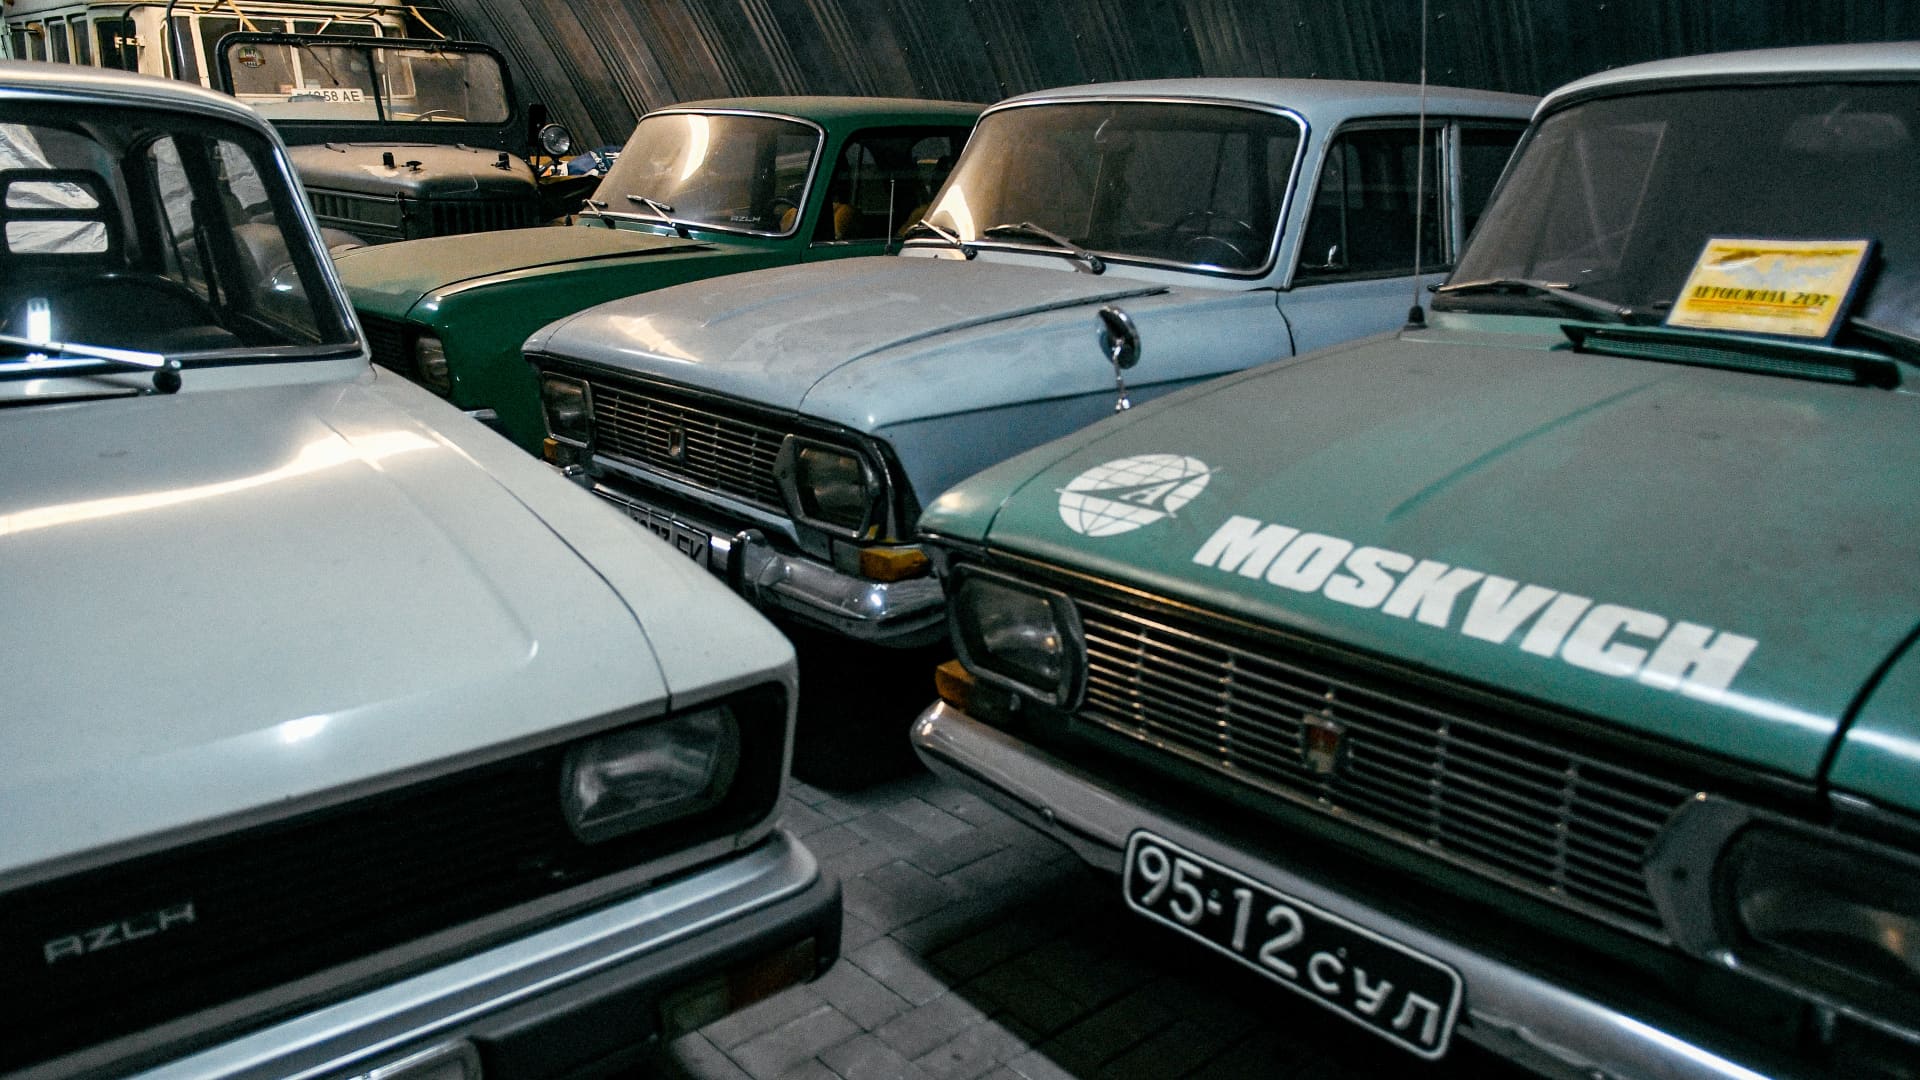 Russia relaunches Soviet-era Moskvich car brand using a former Renault plant - CNBC (Picture 1)